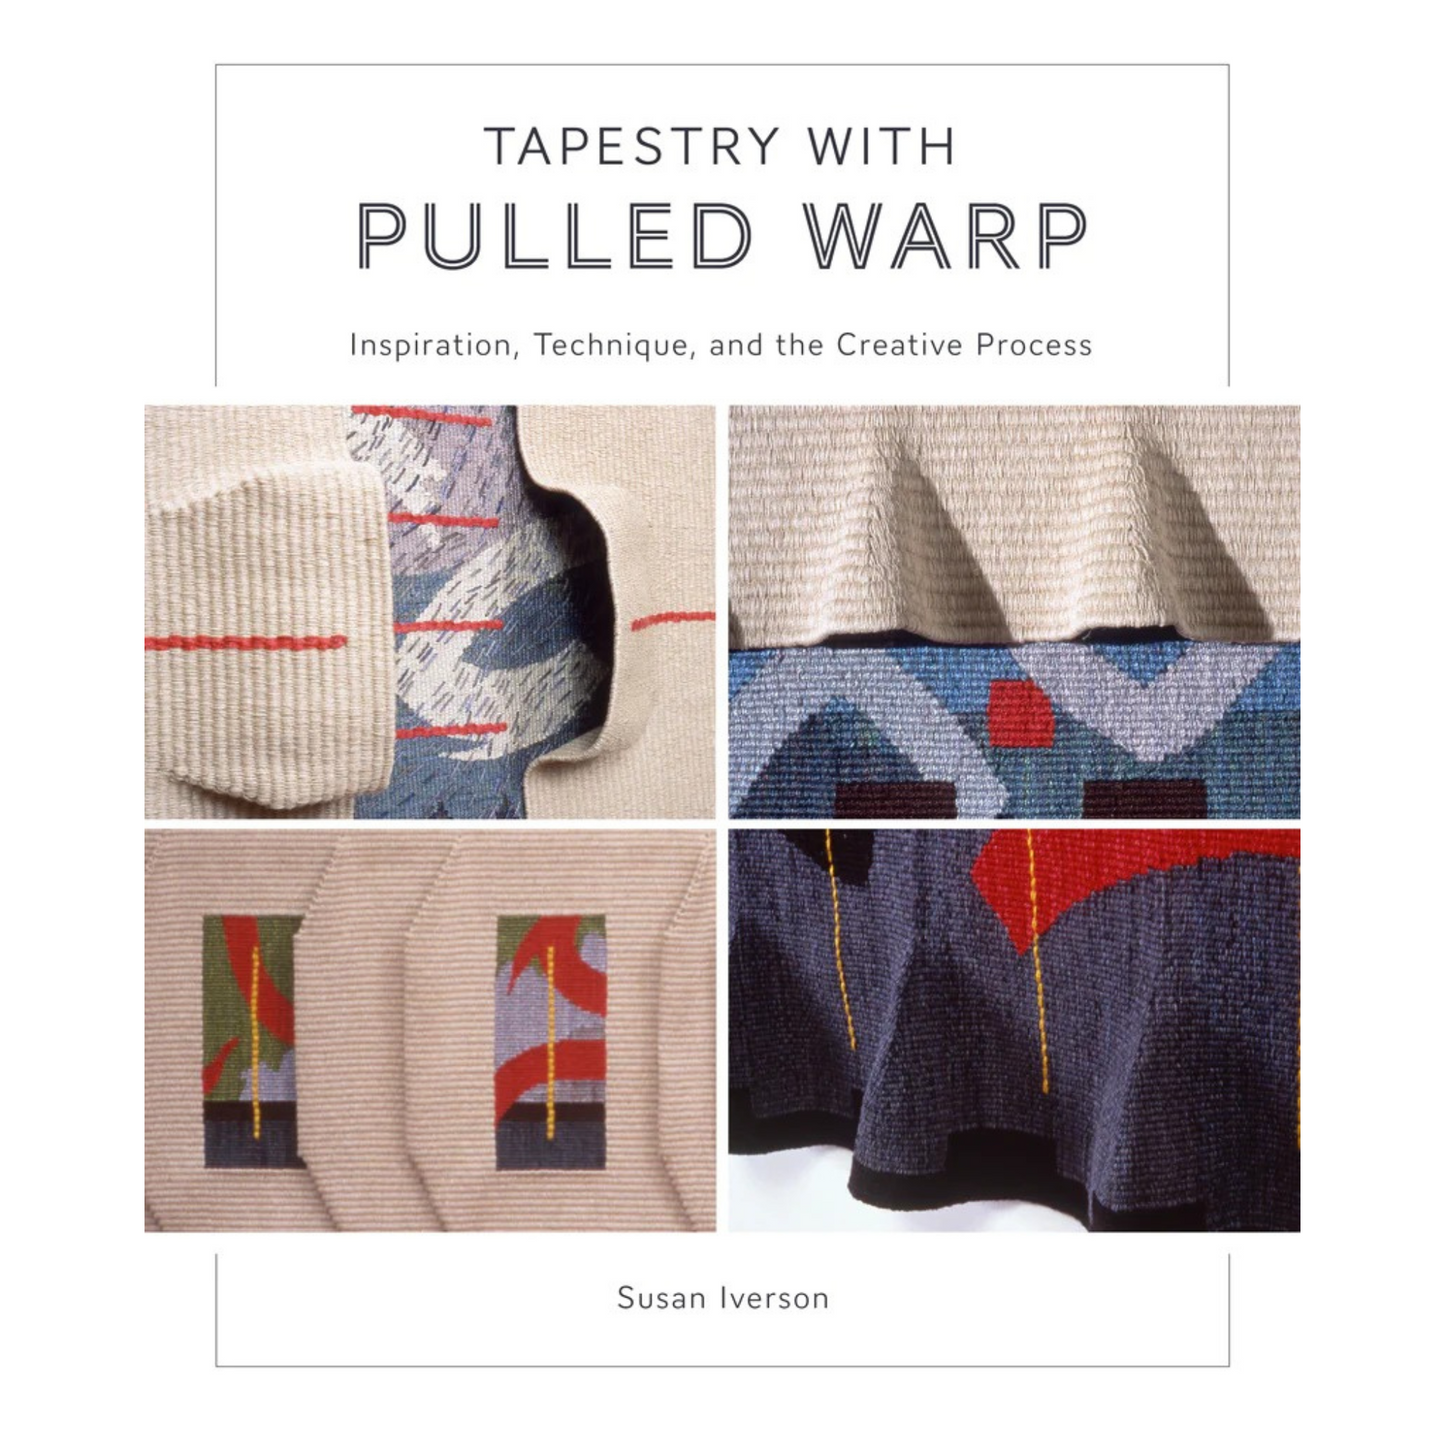 "Tapestry with Pulled Warp" by Susan Iverson